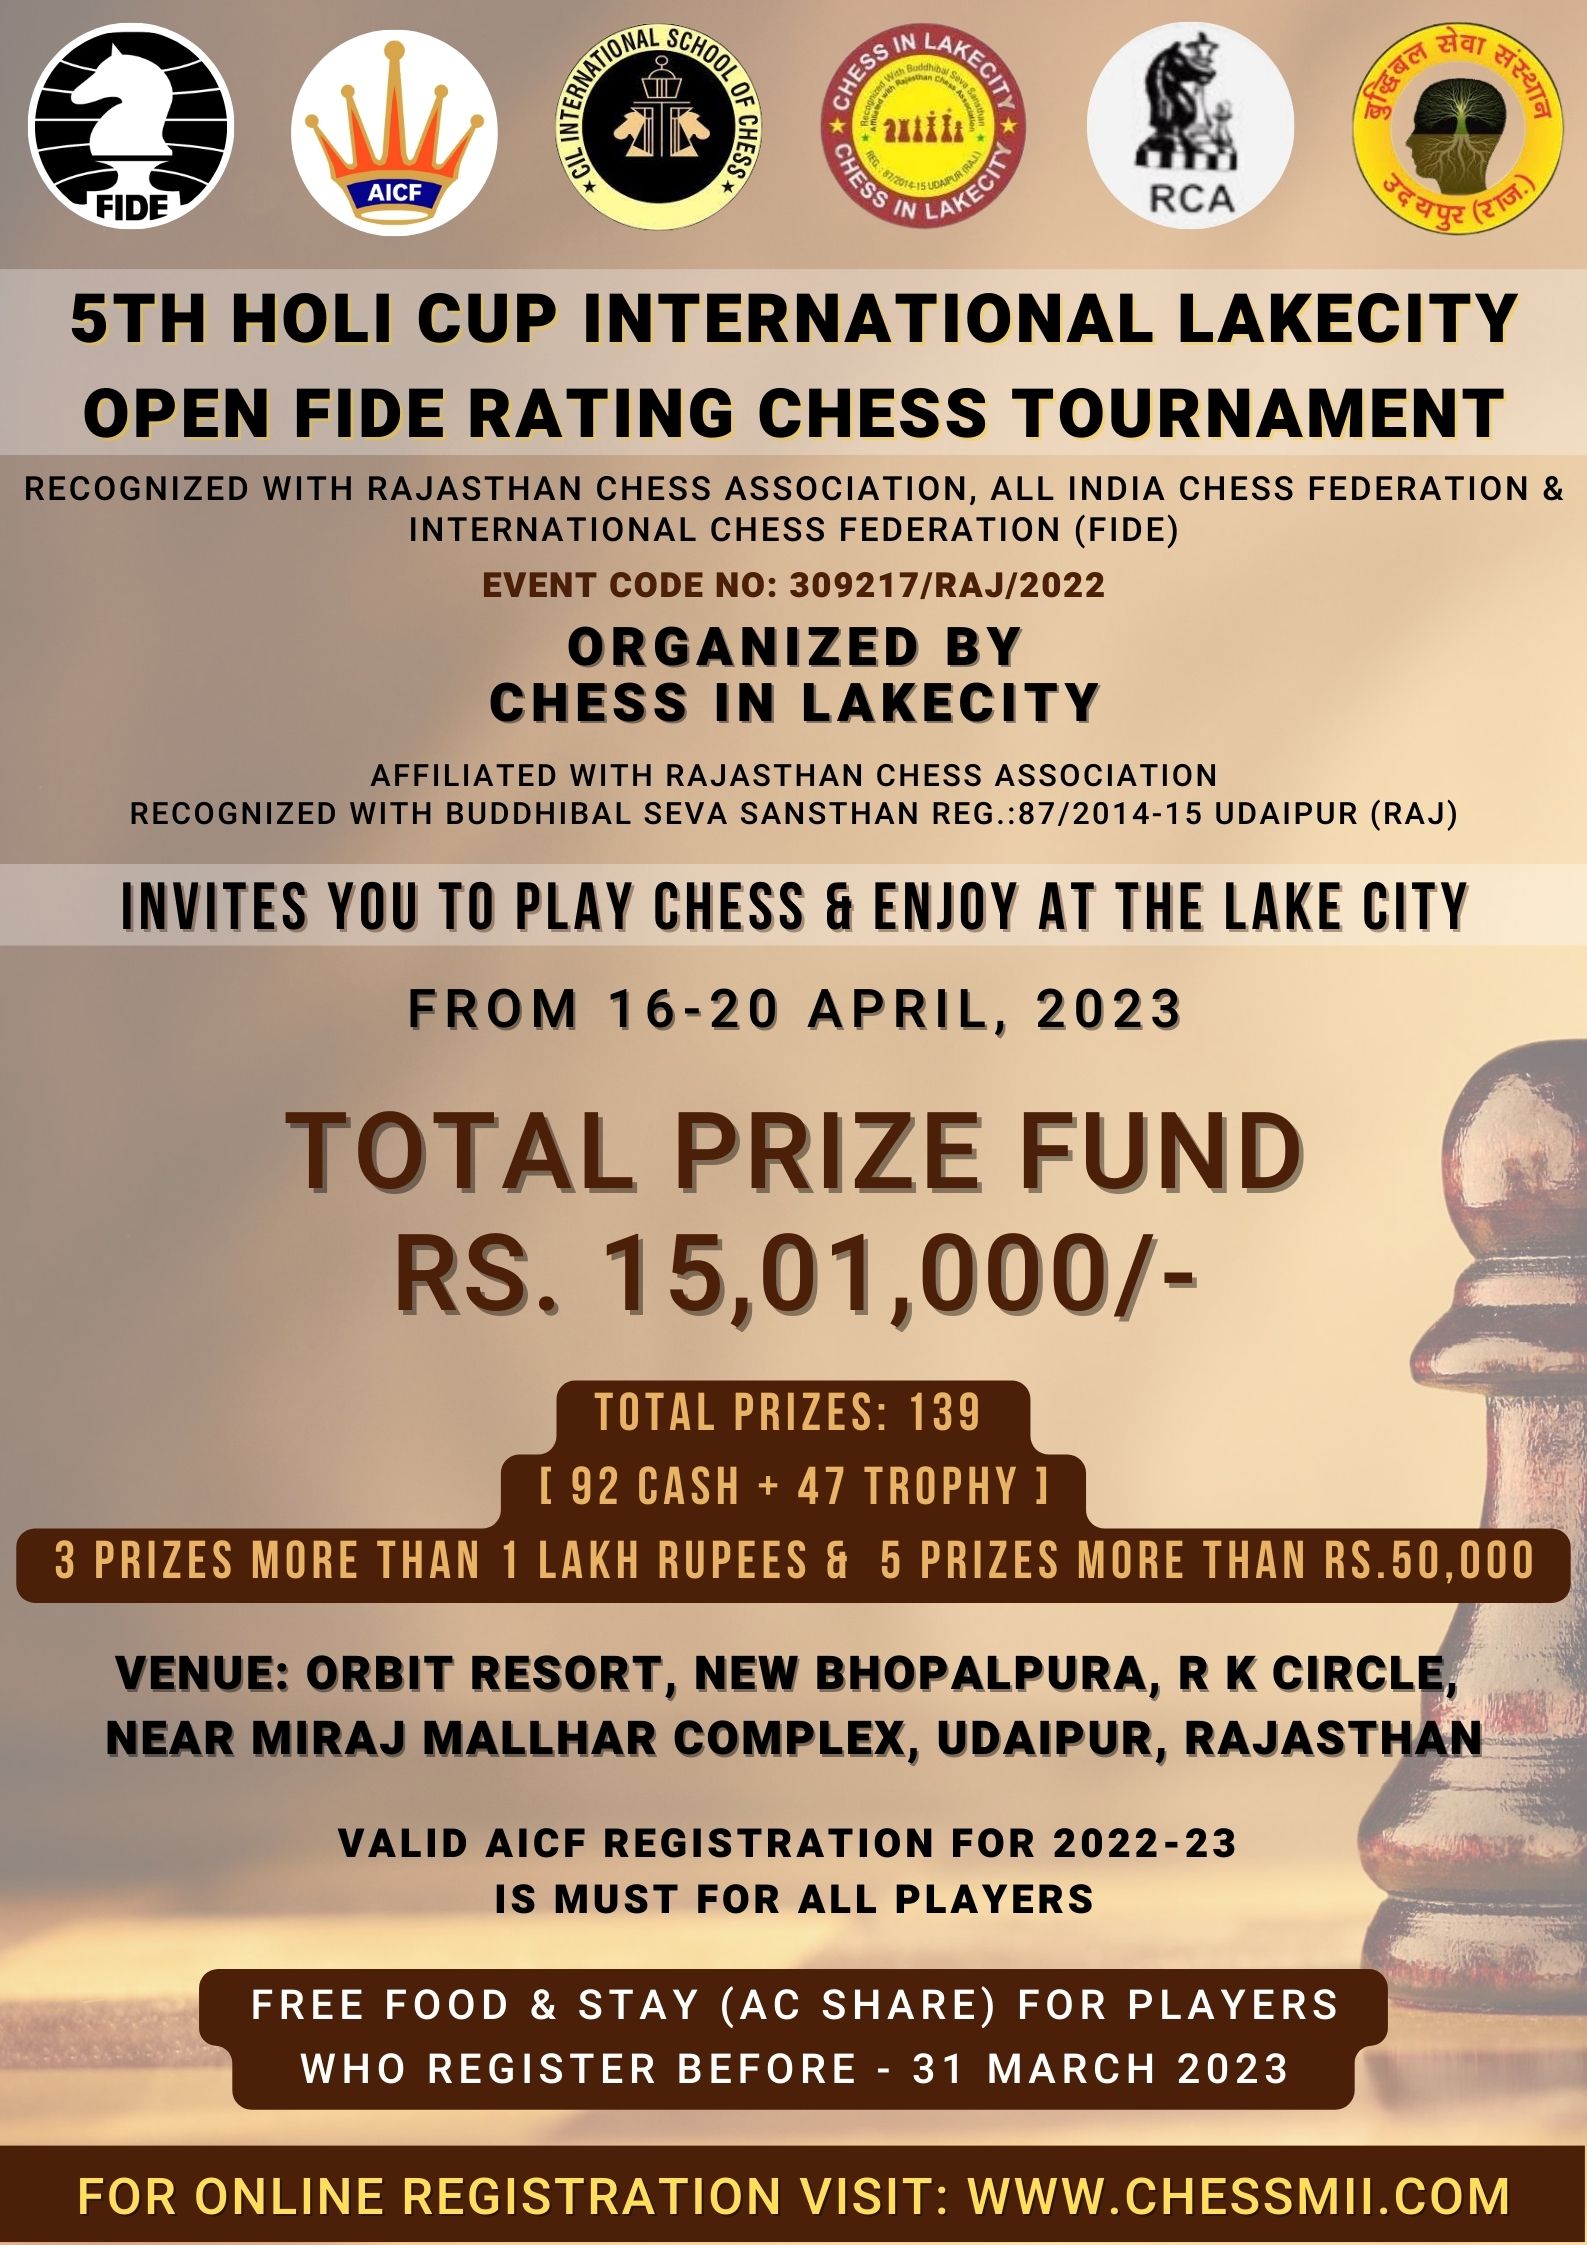 Fide Rated Chess Tournament in lakecity